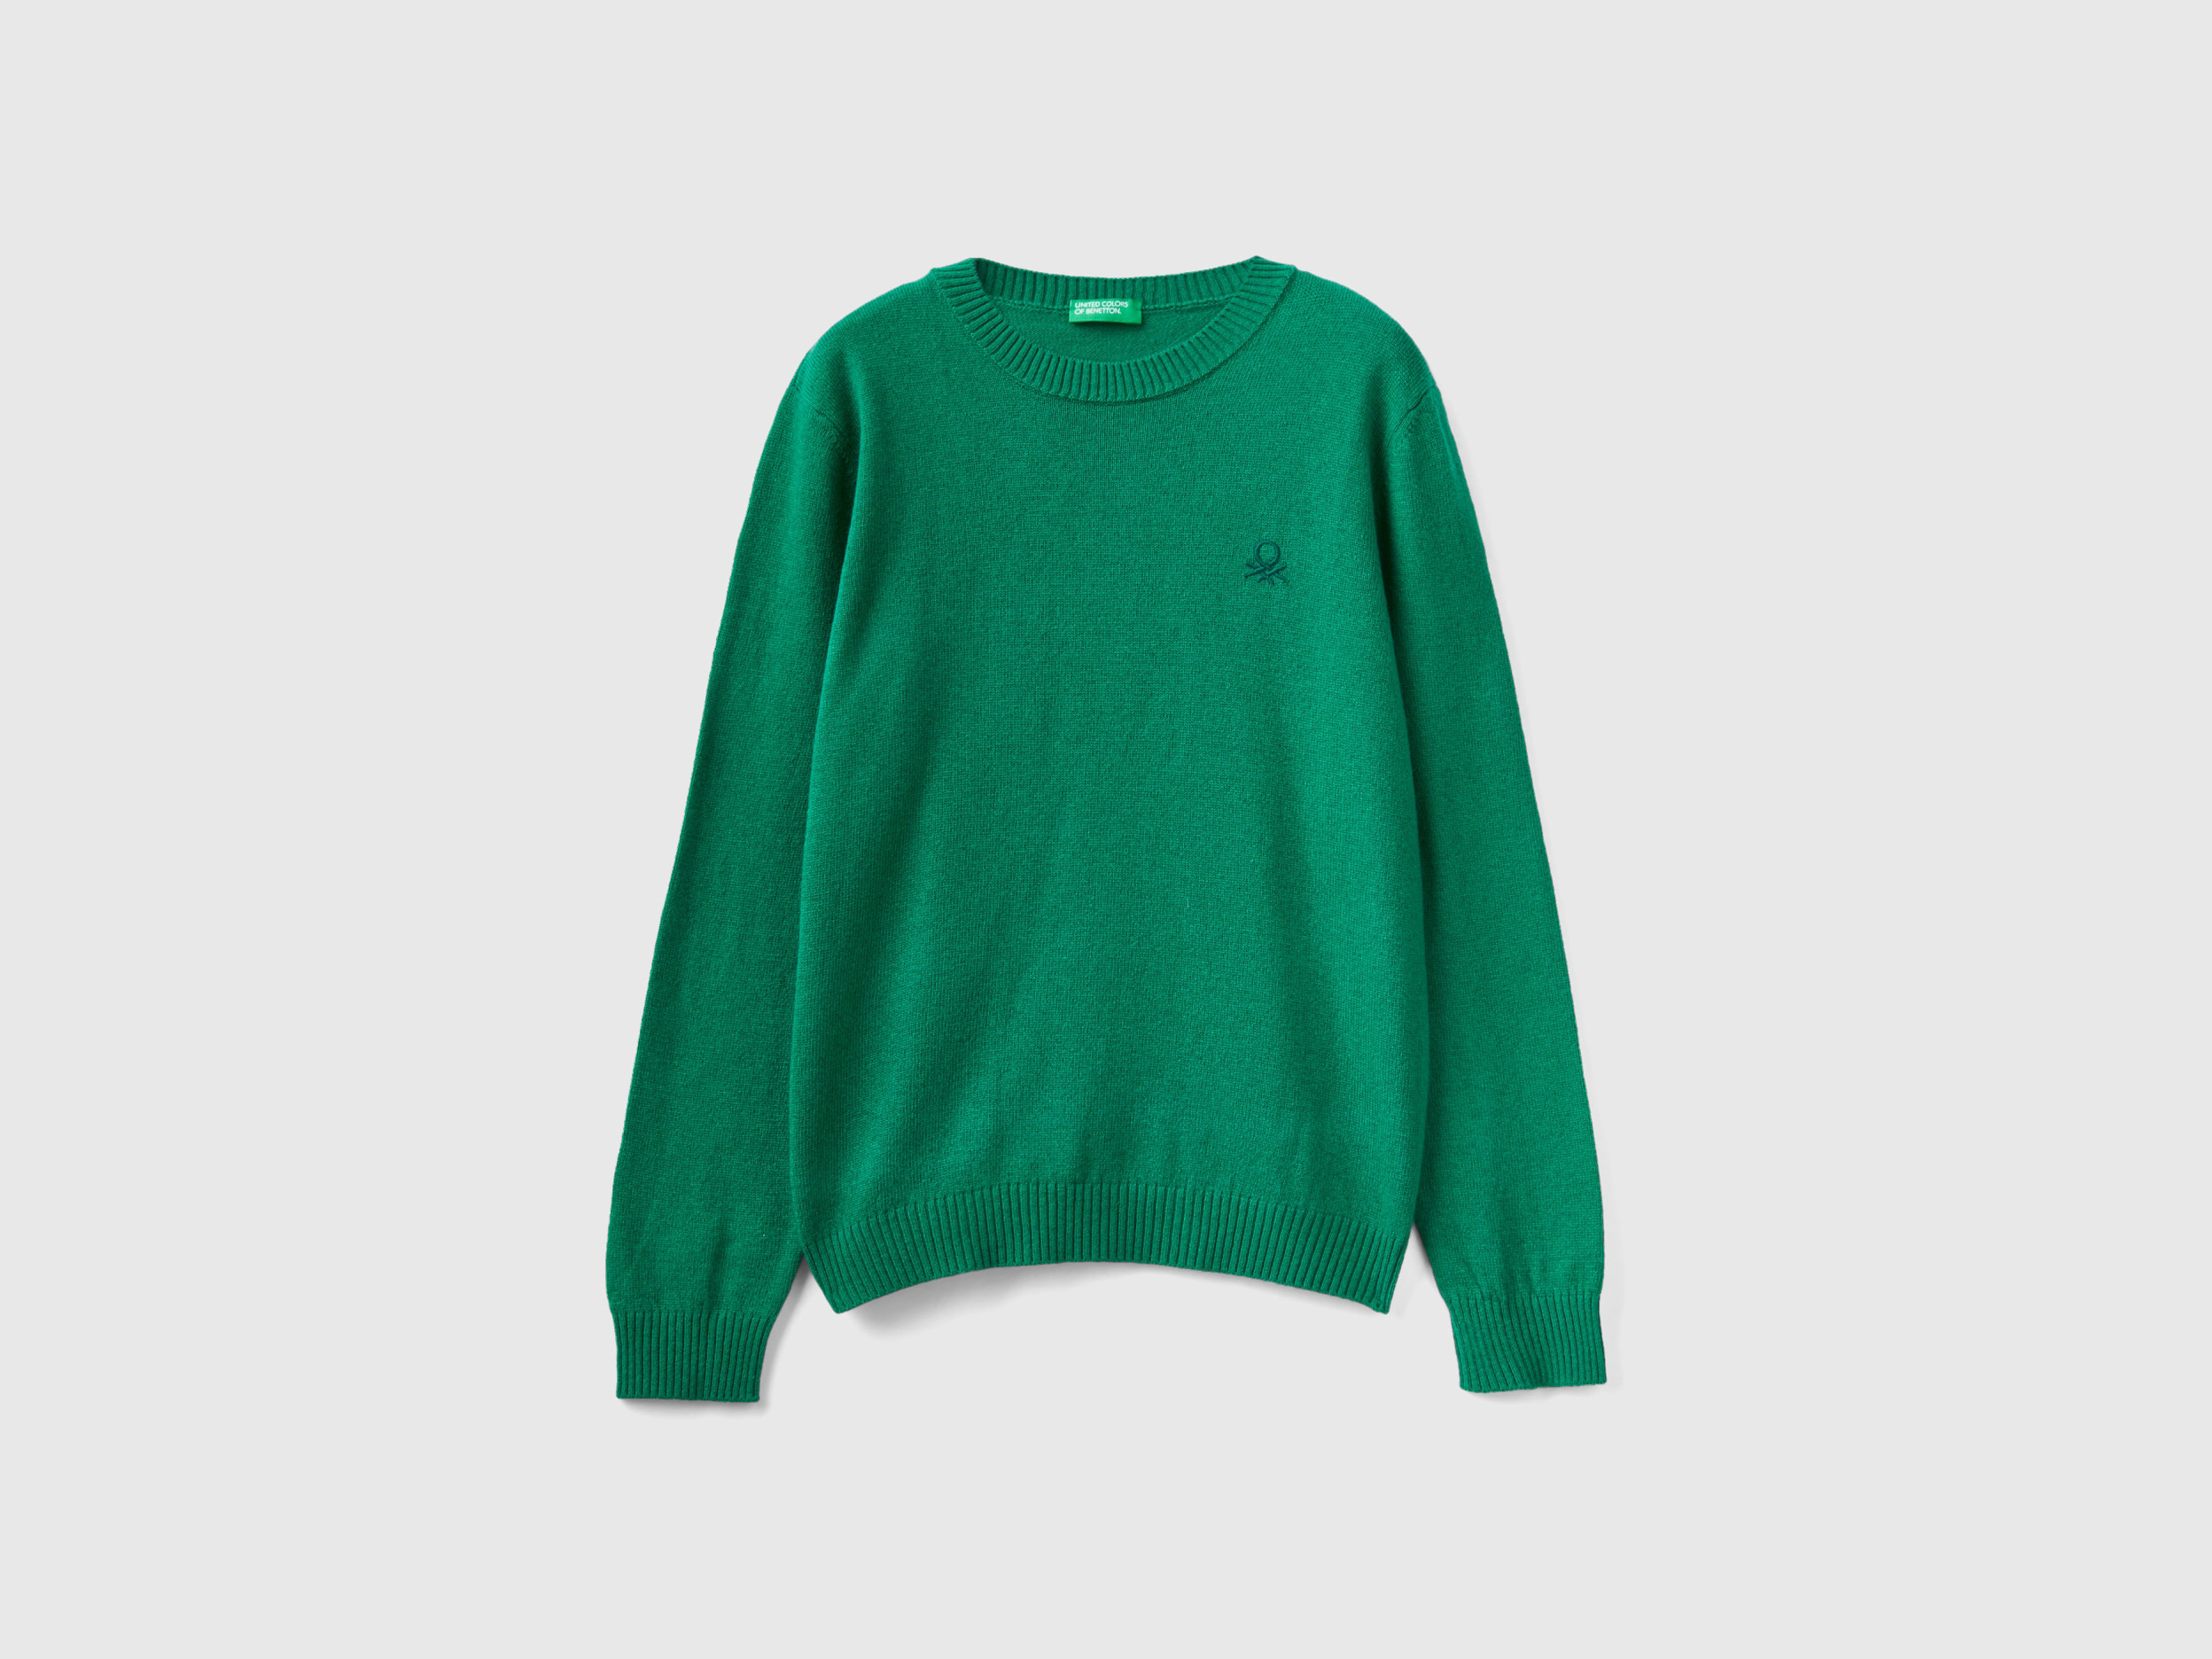 Benetton, Sweater In Cashmere And Wool Blend, size 2XL, Green, Kids